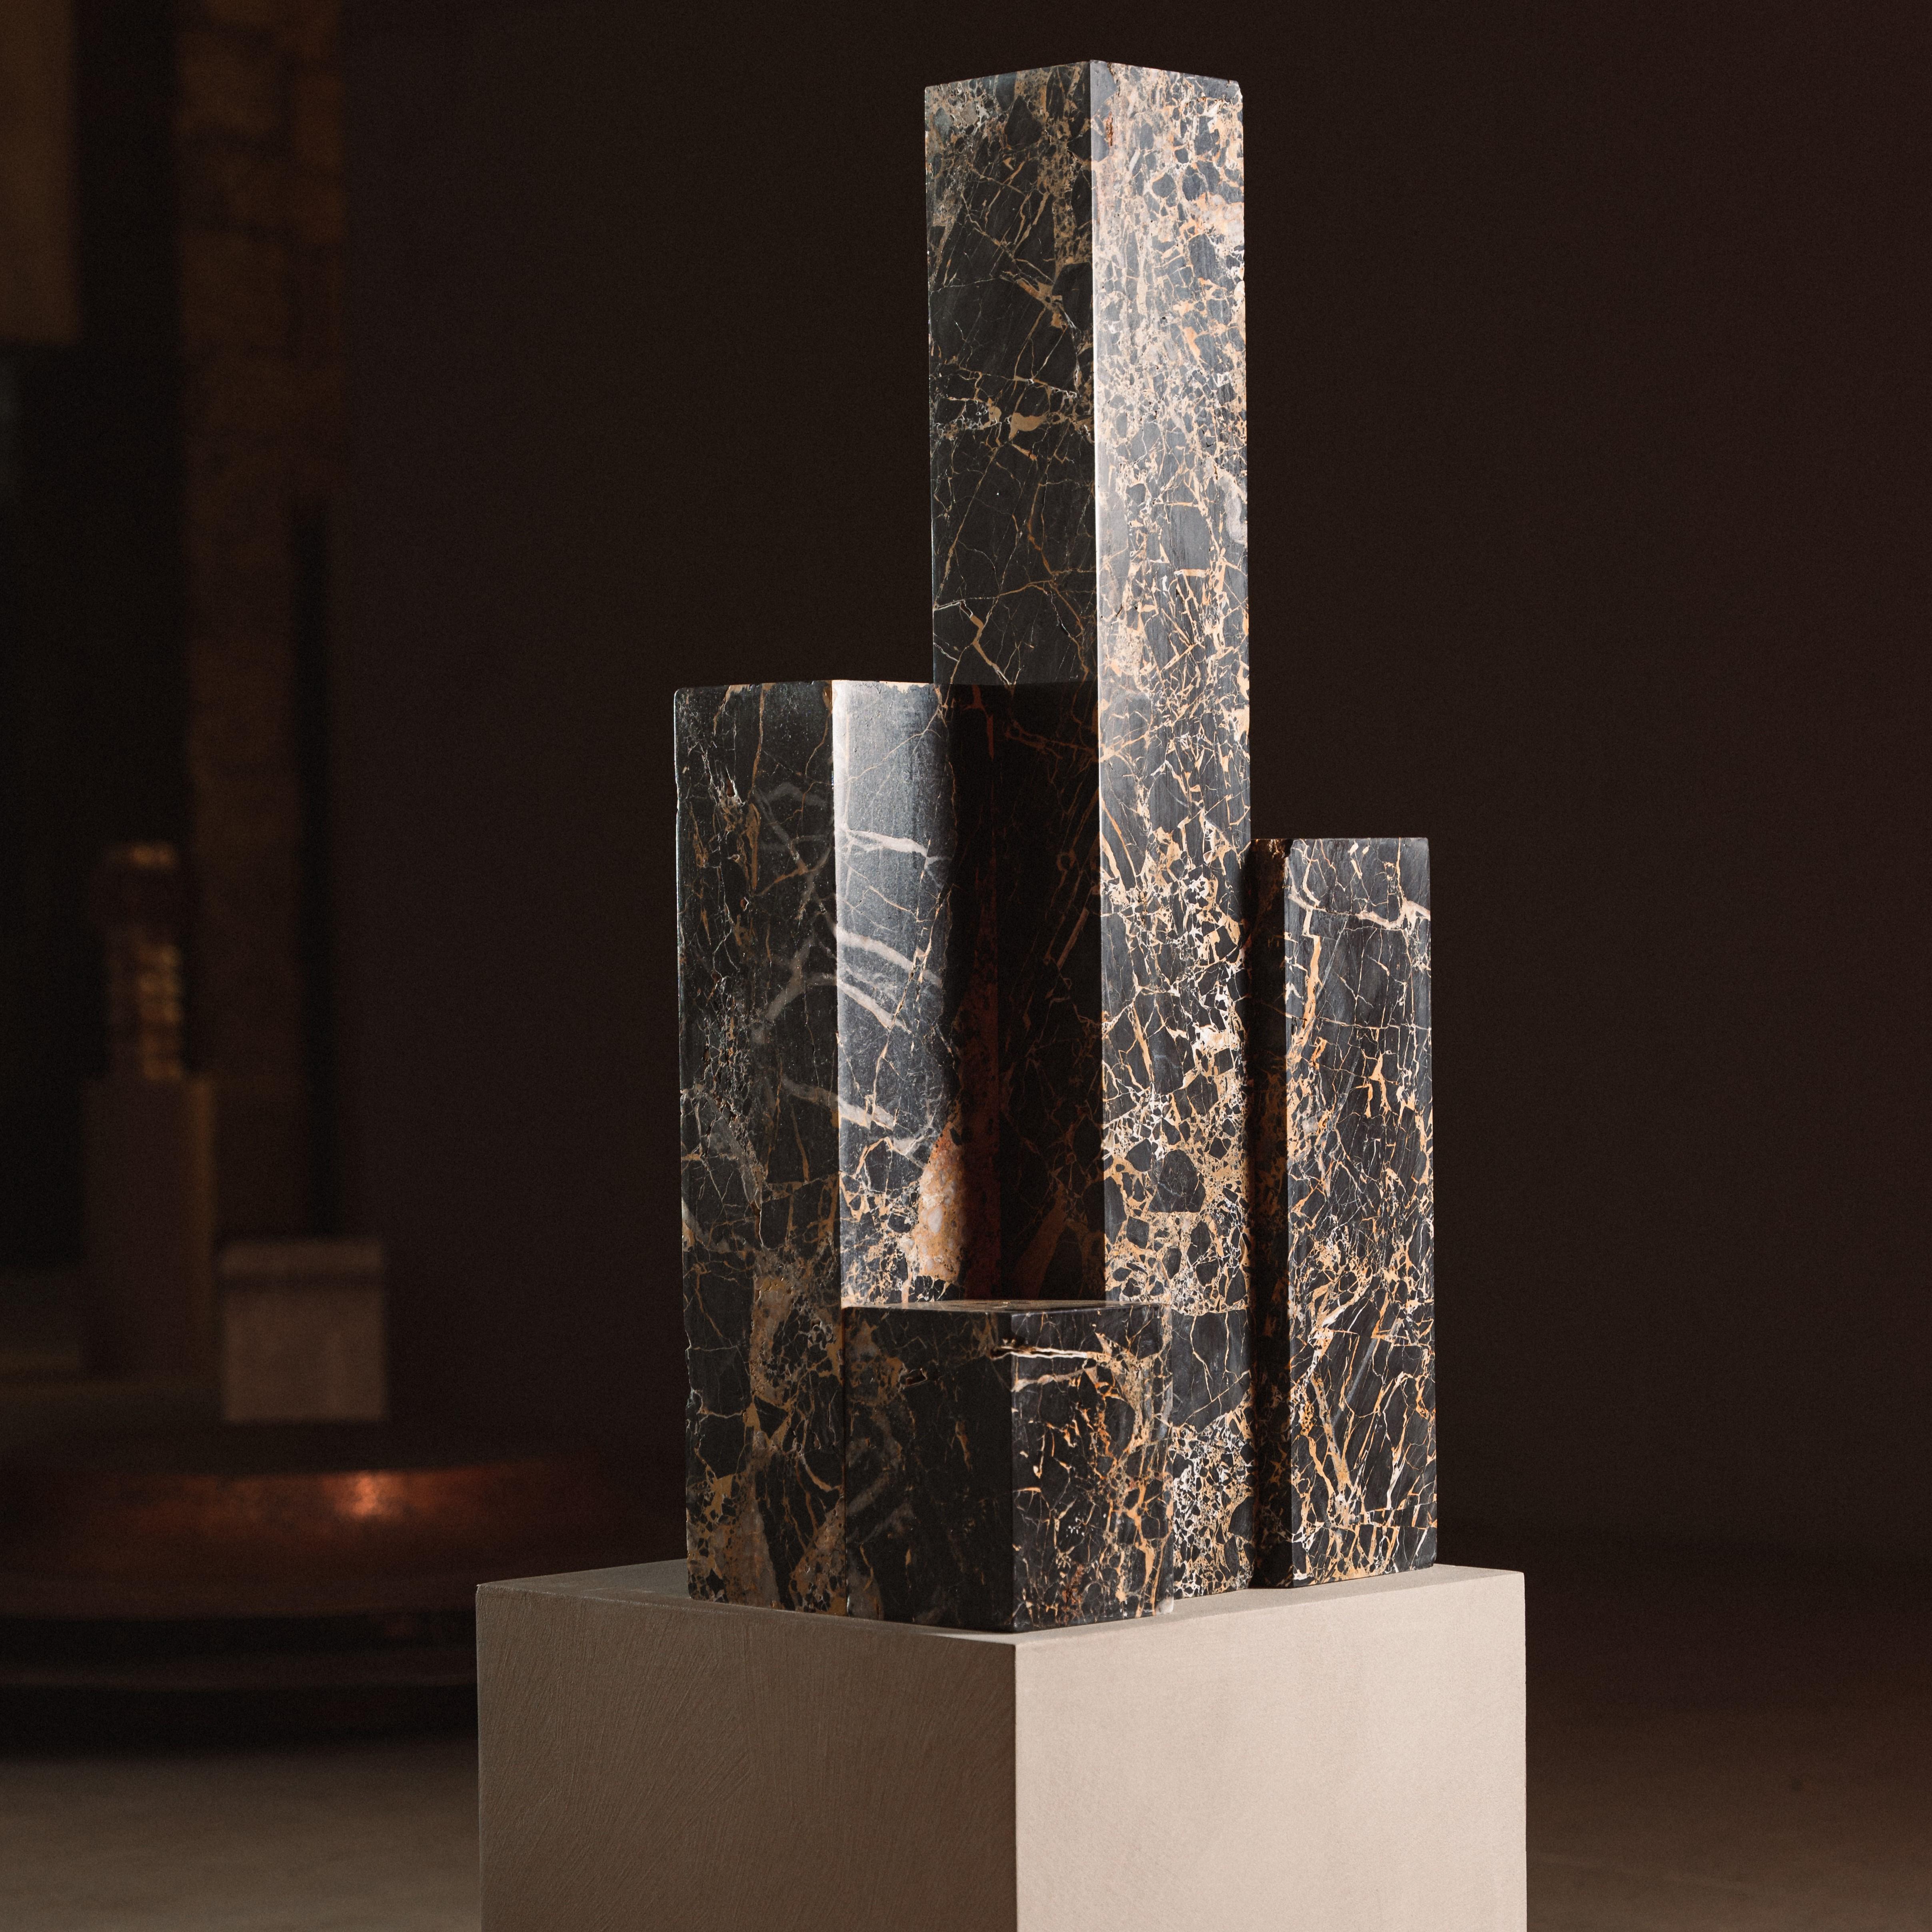 Pyrus Dos fire torch by Andres Monnier.
One of a kind.
Dimensions: W 45 x D 45 x H 100 cm.
Materials: Portoro Black Marble.
Stone options available: Grey, black and white marble, natural and red travertine, volcanic, basalt, granite rock, onyx,